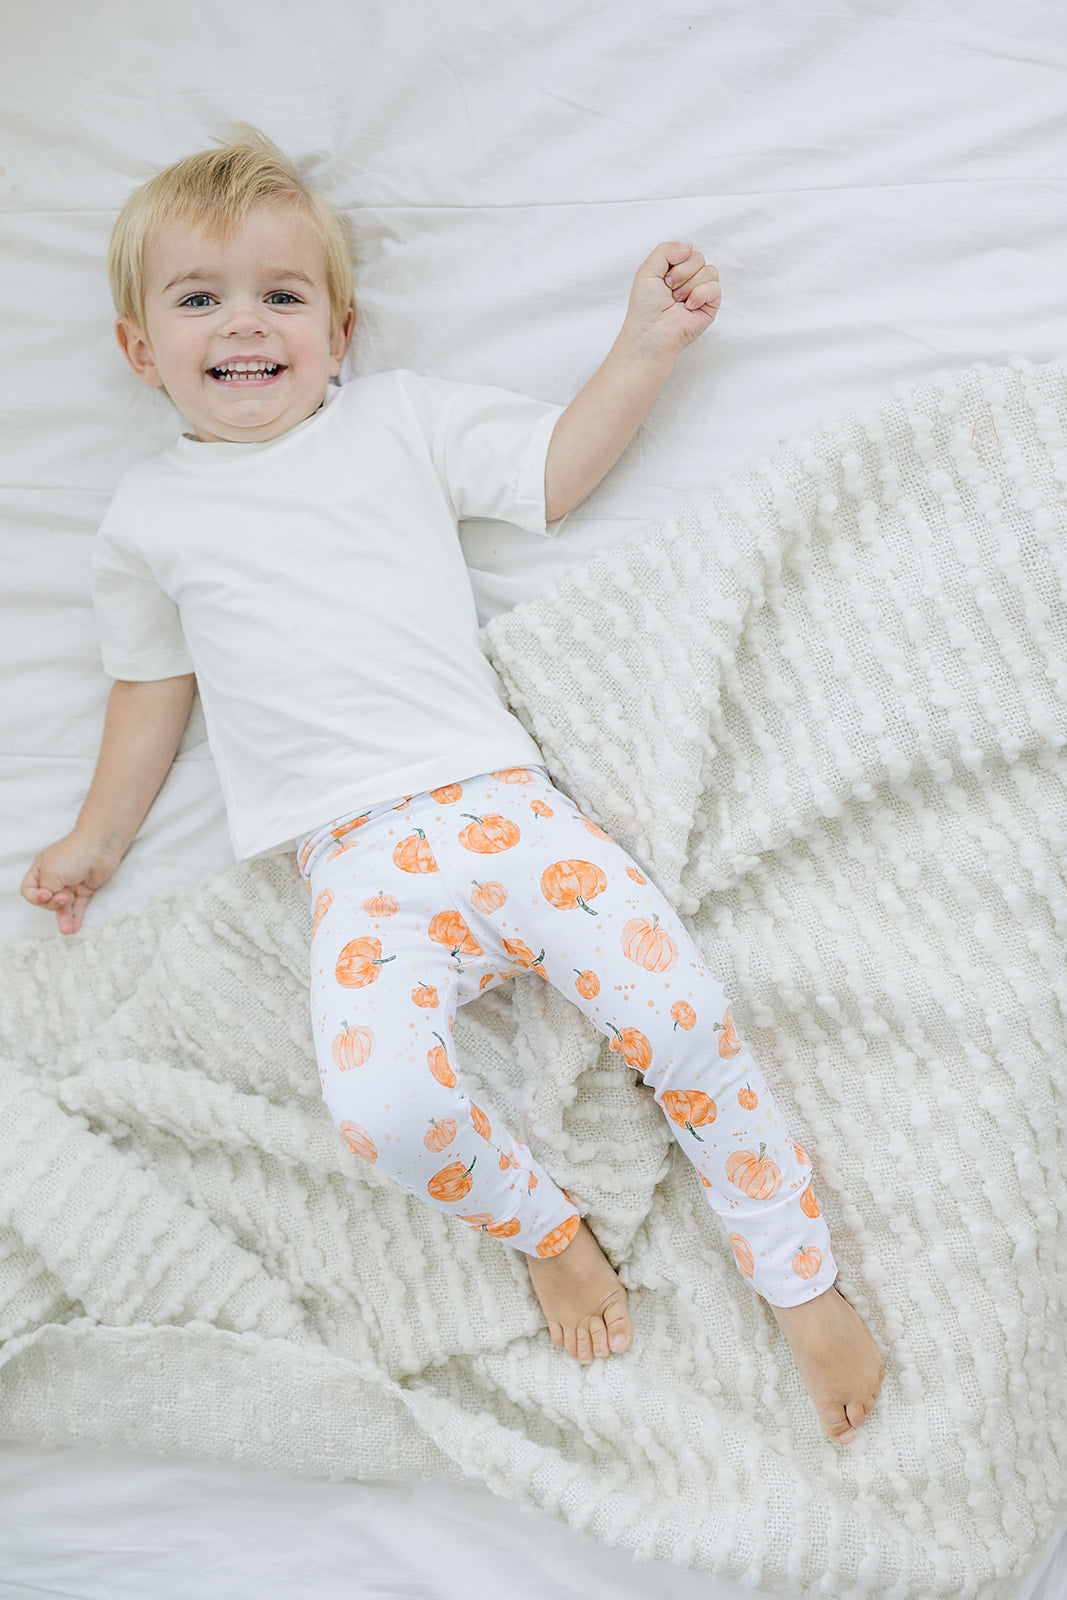 RTS Speckled Pumpkin Leggings (Matching) 0-3,6-9,9-12,12-18, 2T 4T